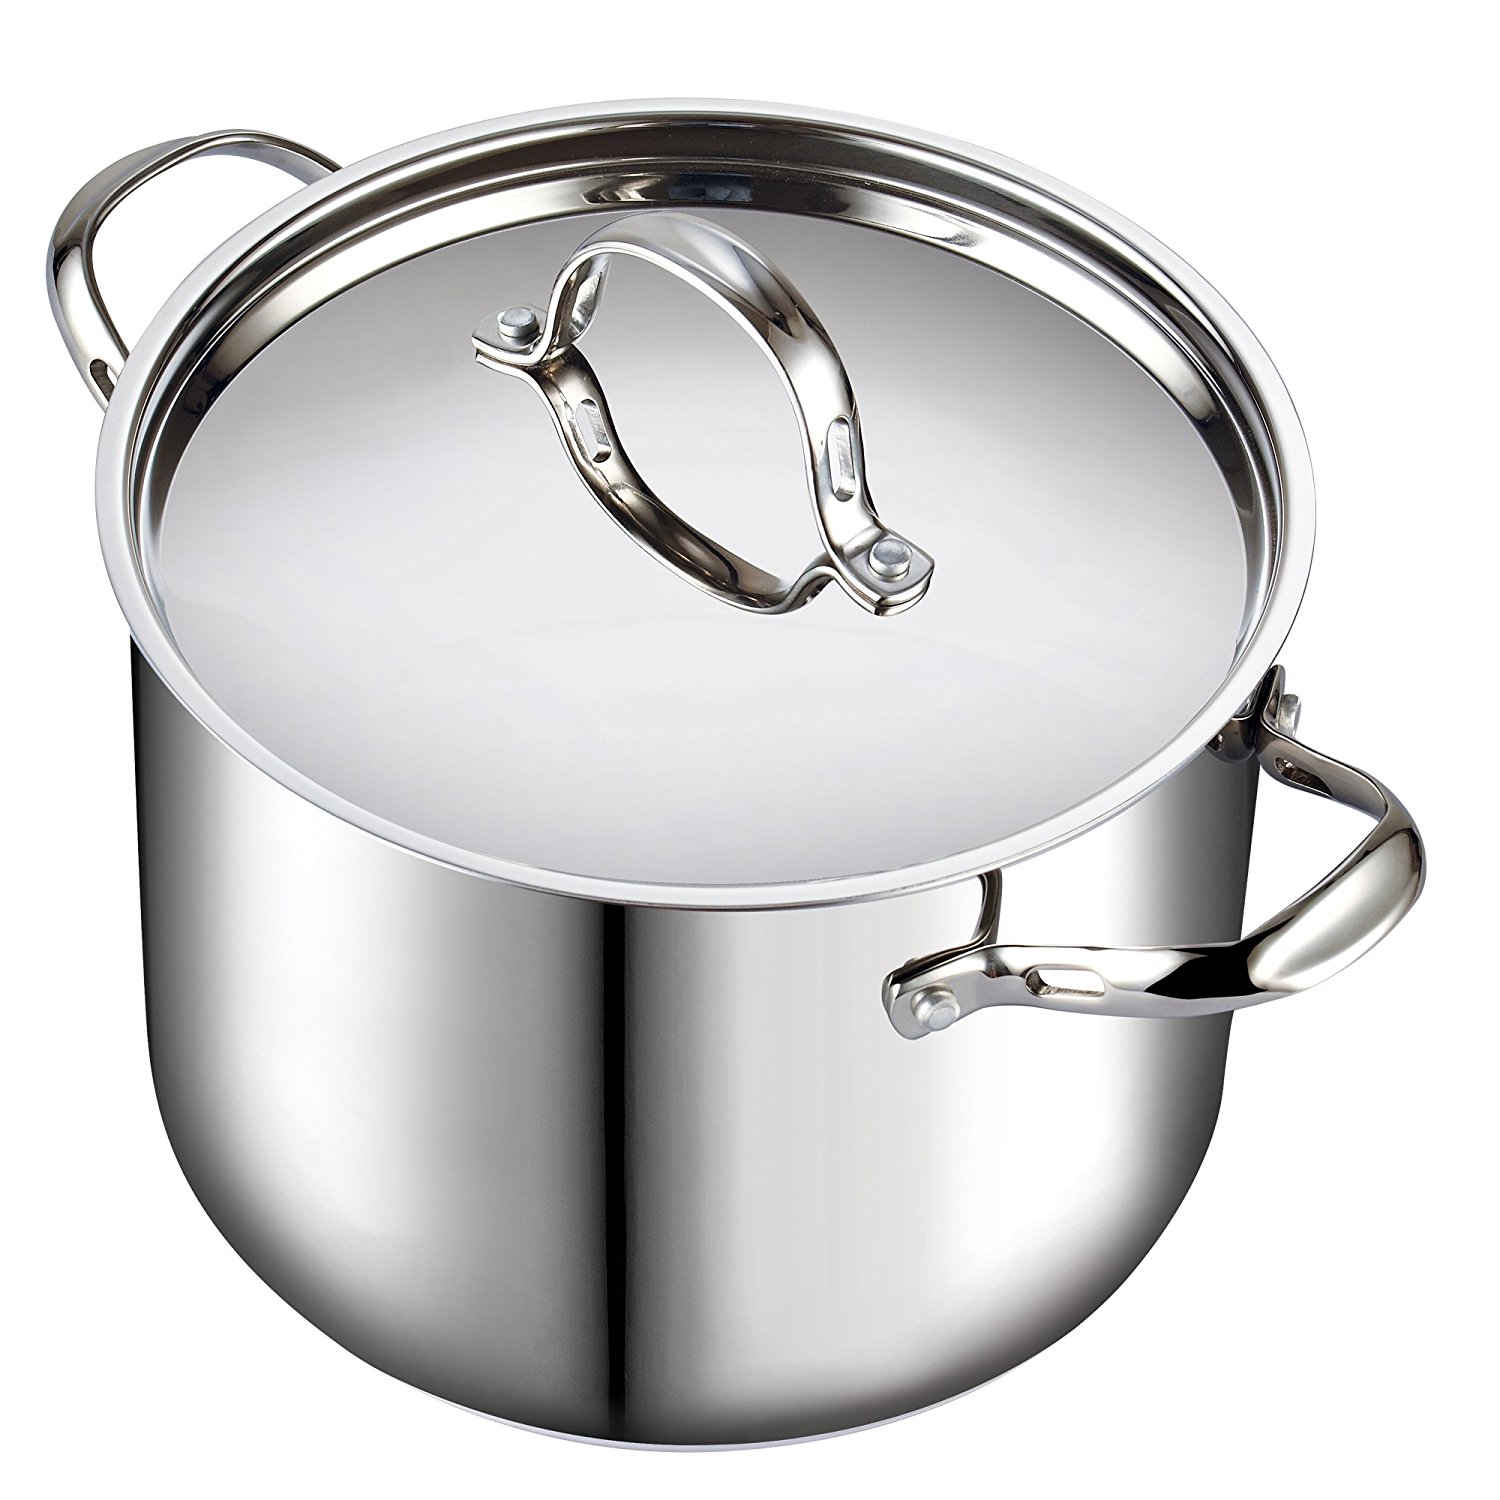  Cooks Standard Classic 02520 12 quart Stainless Steel Stockpot with Lid, Large, Silver - Stainless Steel Pot